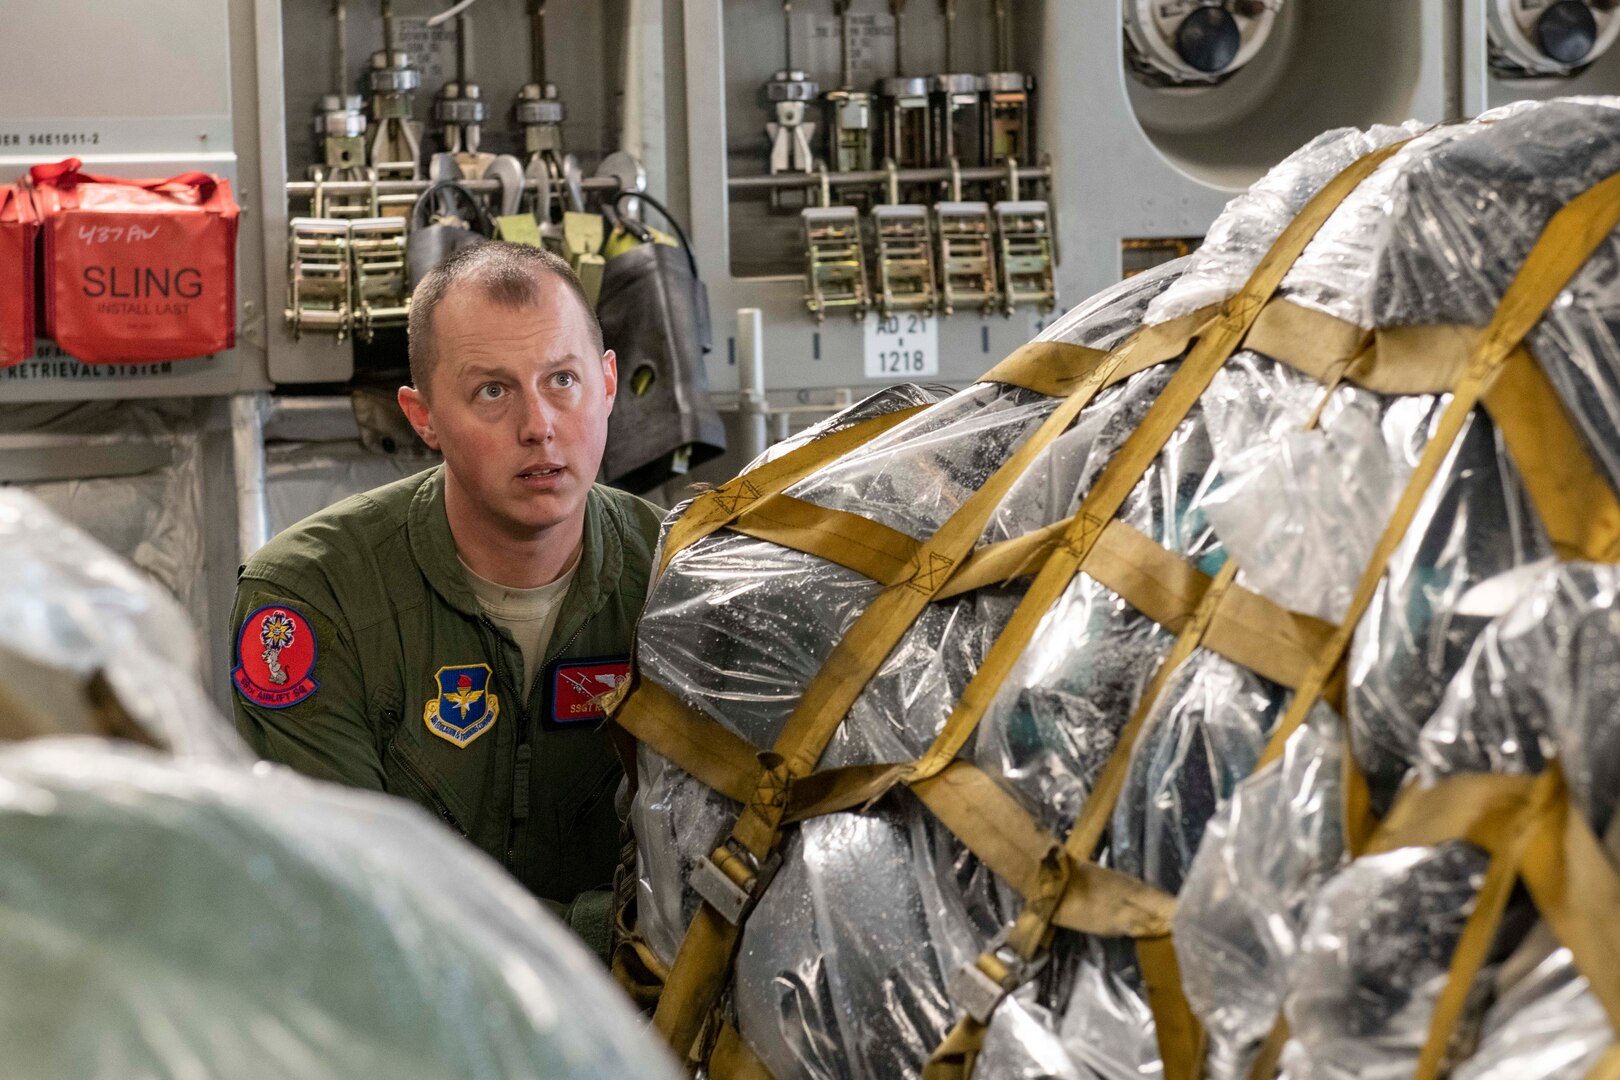 Airman sitting inside airplane next to pallet of duffel bags